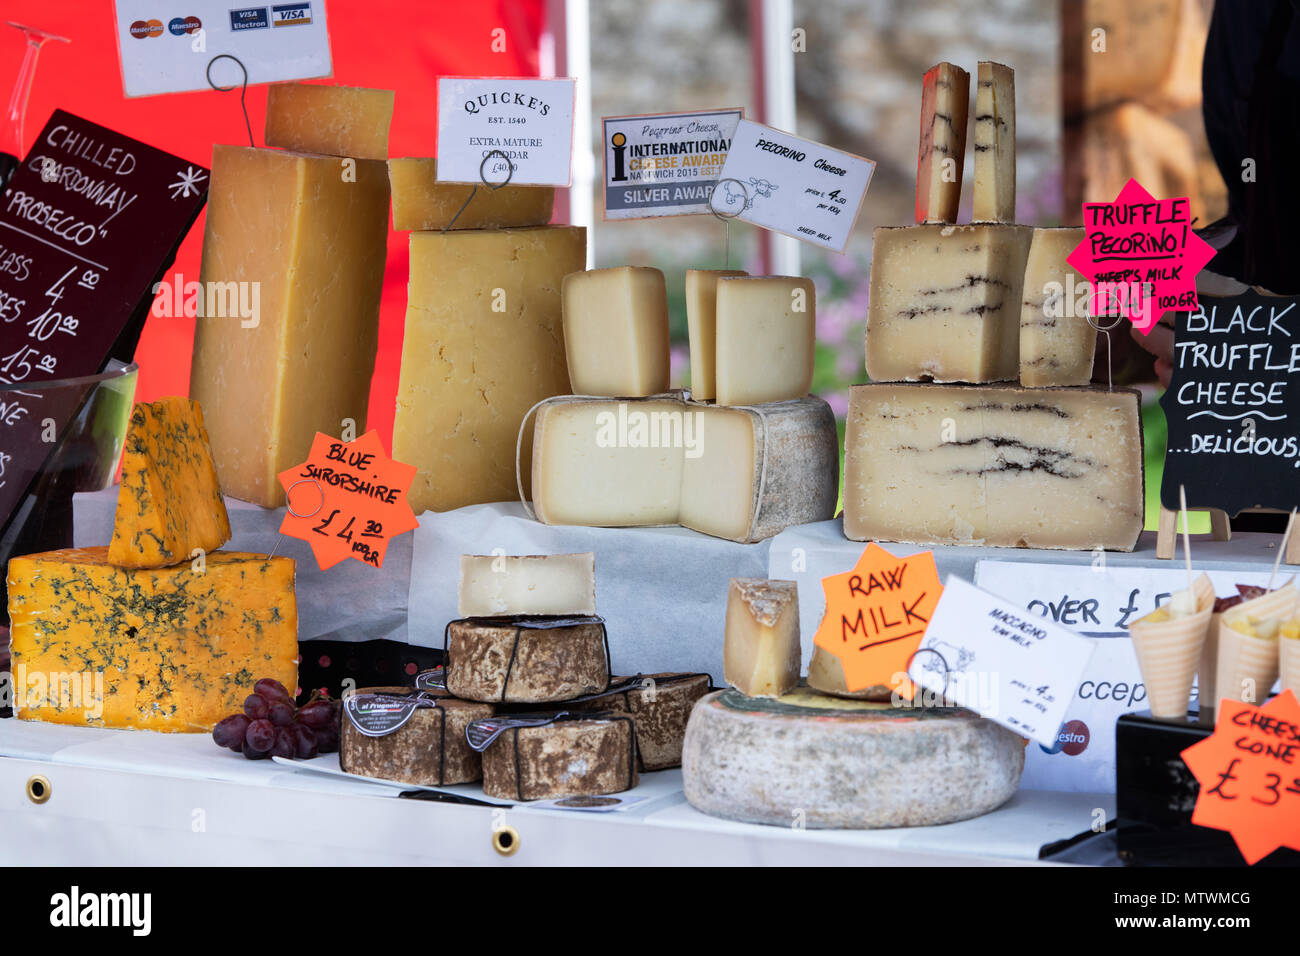 Speciality and Artisan cheese stall at a food festival. Oxfordshire, England Stock Photo